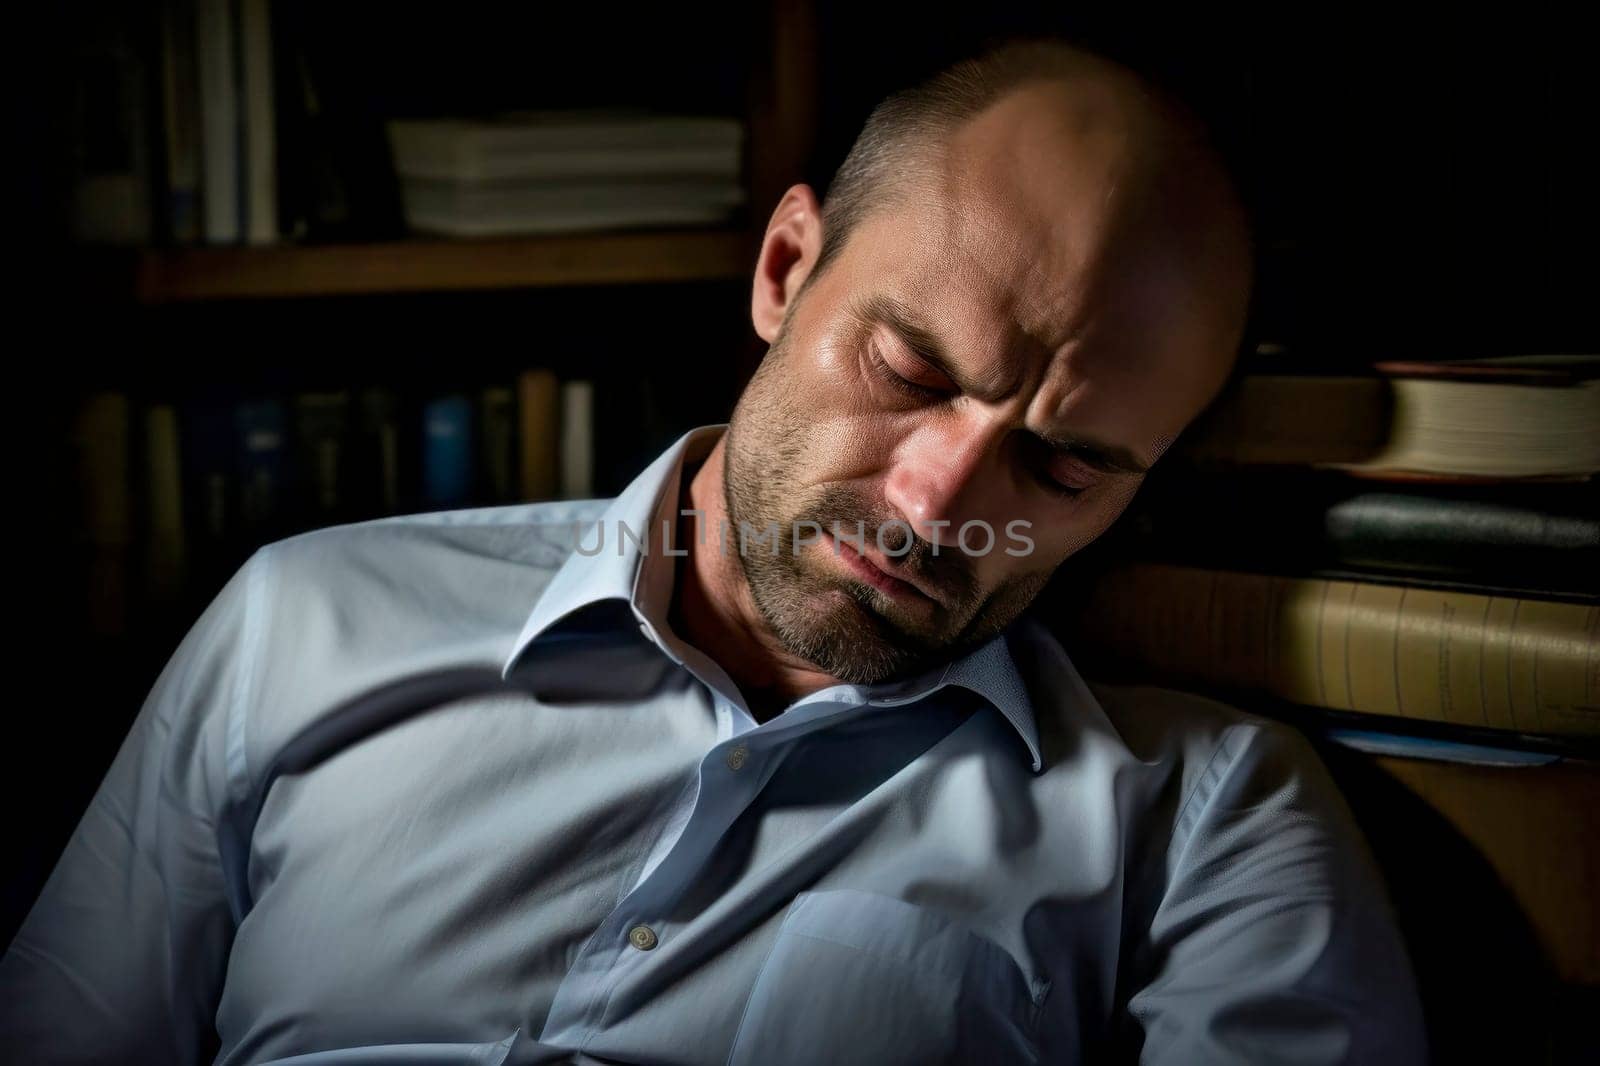 Serene Sleep: Close-Up of a Man Sleeping in a Library by pippocarlot